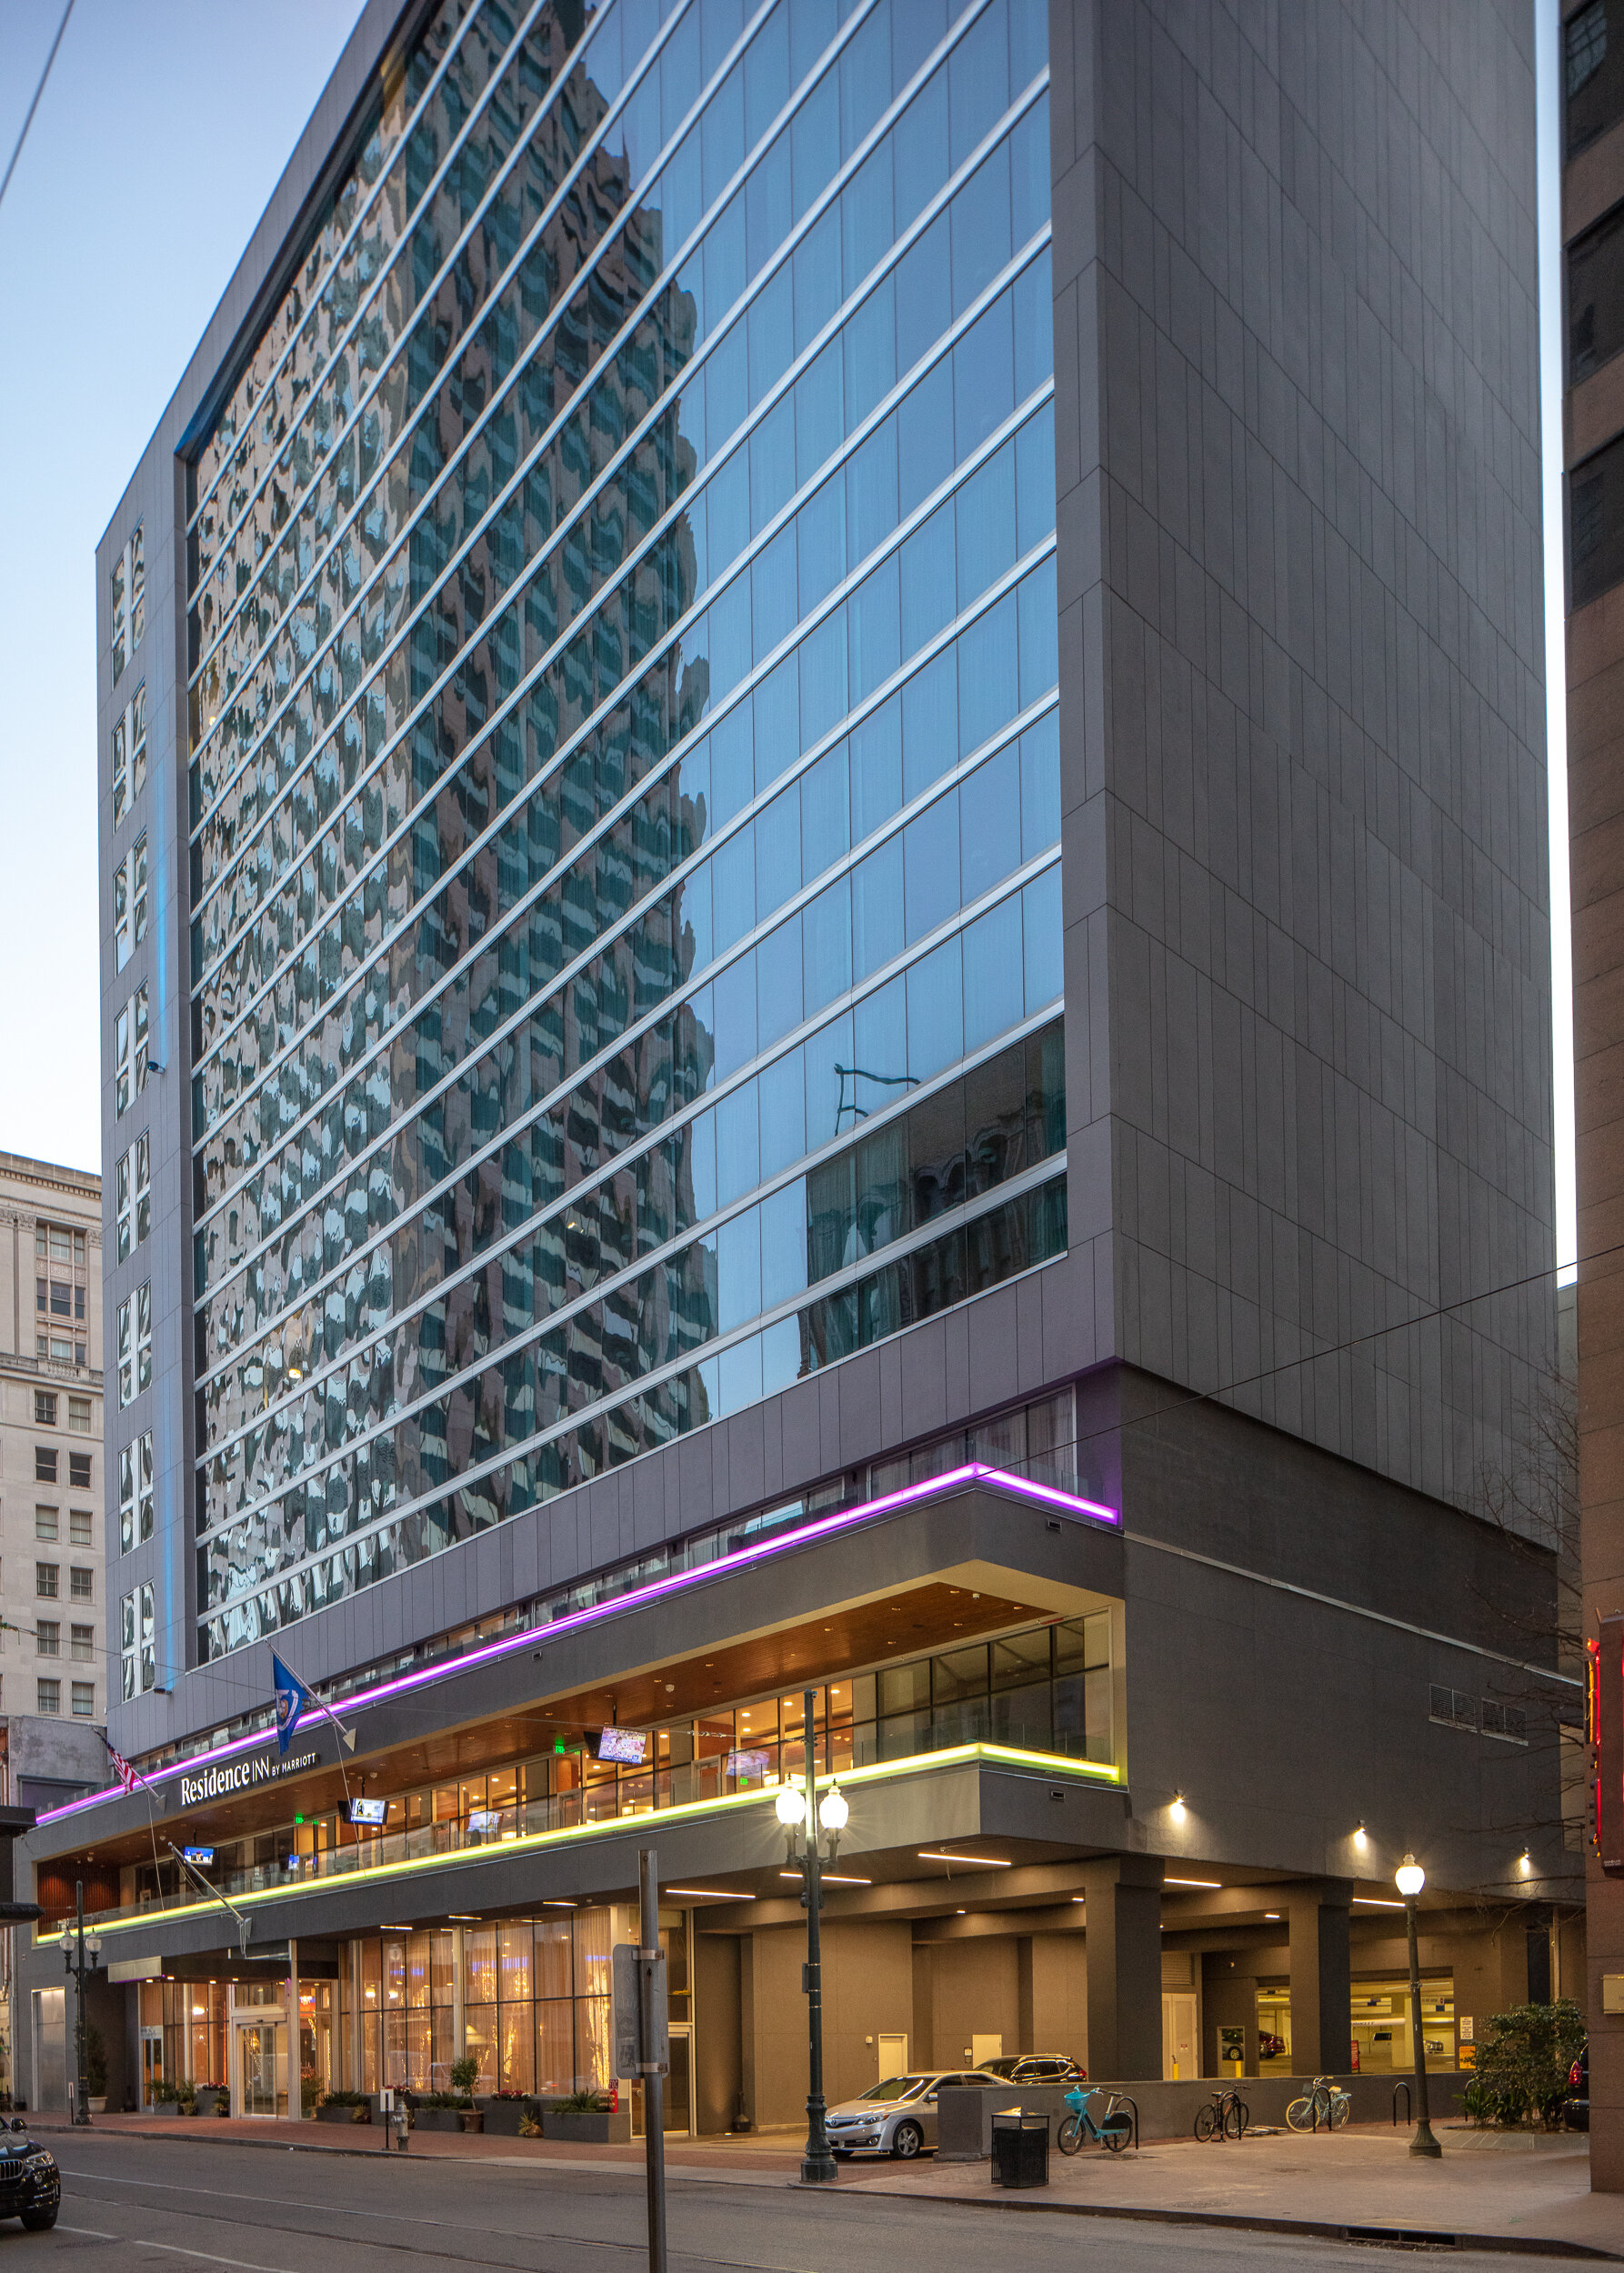 Residence Inn - New Orleans, LA | Campo Architects